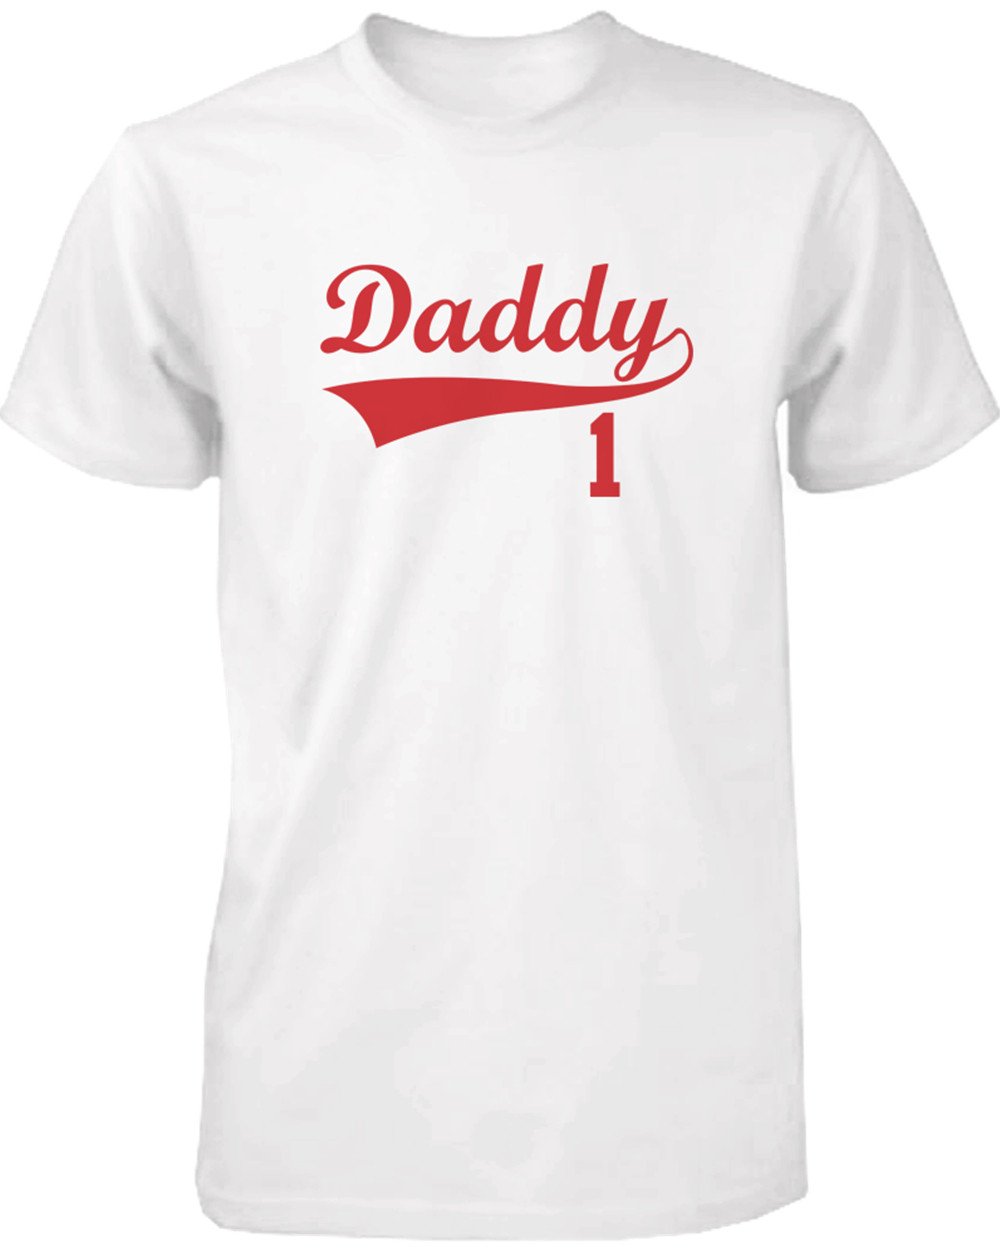 Daddy Mommy and Baby Matching Baseball Family T-Shirt / Onesie (Sold Separately)